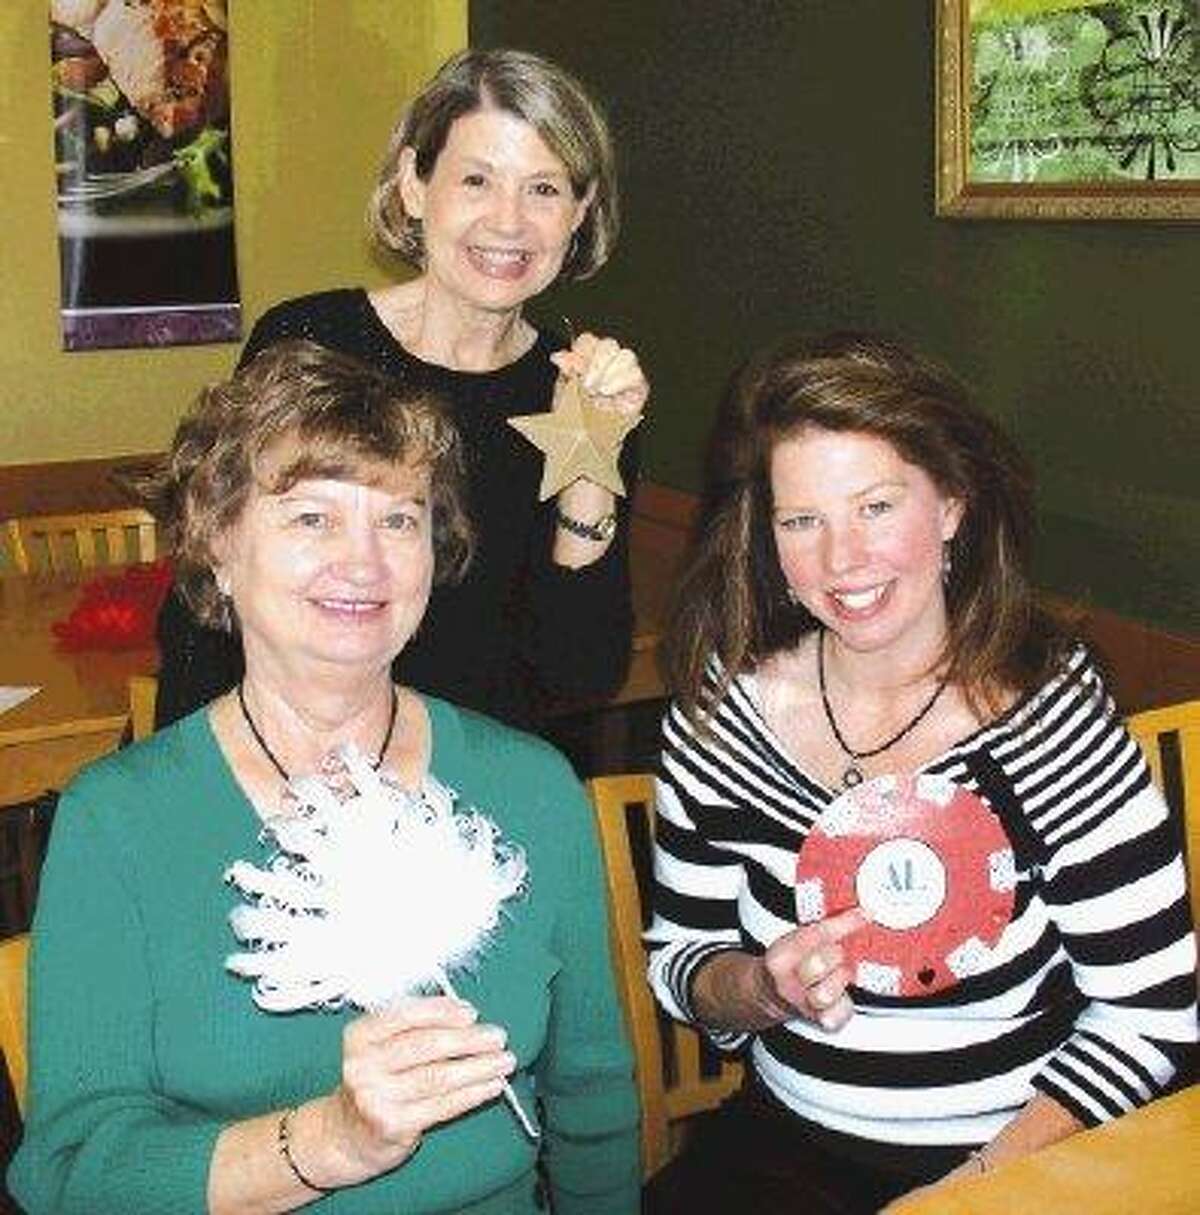 Georgia Piwonka, Patsy Horner and Amy Best work on bid paddles for the live auction at the Assistance League's big spring gala, coming up Saturday, April 10, in the South Shore Harbour Resort's Crystal Ballroom.